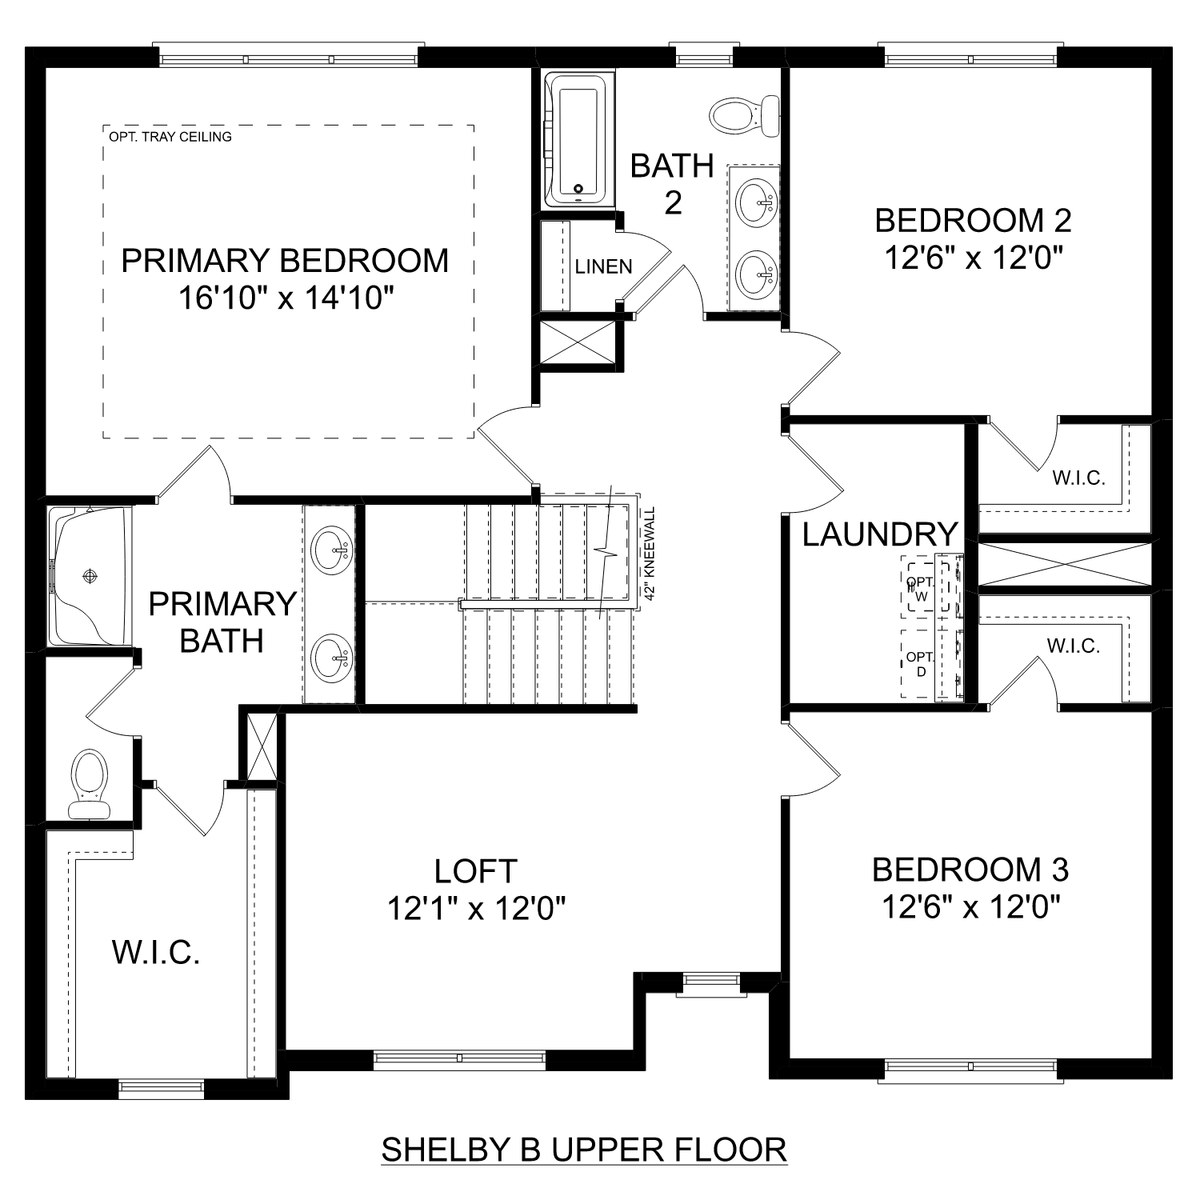 2 - The Shelby B buildable floor plan layout in Davidson Homes' Spragins Cove community.